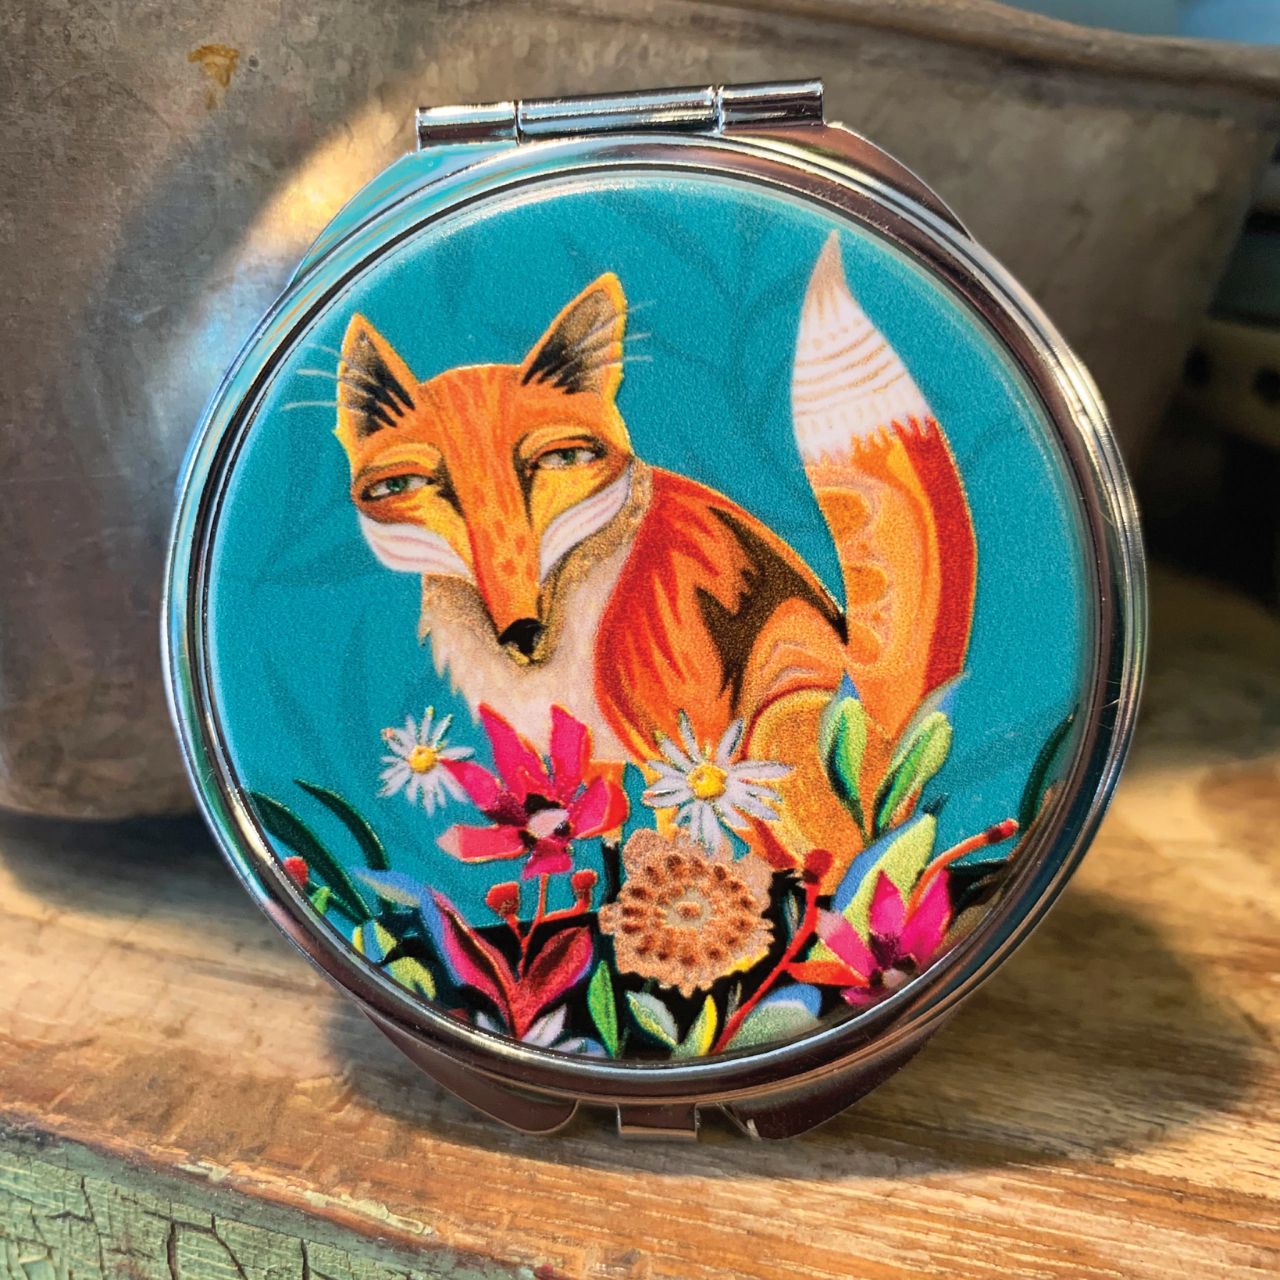 Michelle Allen Fox and Flowers Trinket Box  This lightweight and durable Fox and Flowers Trinket Box trinket box makes a splendid gift for a friend or yourself. They are the perfect size to fit in any purse, make-up bag, carry on, or backpack. And best of all, they are super practical for every day use.